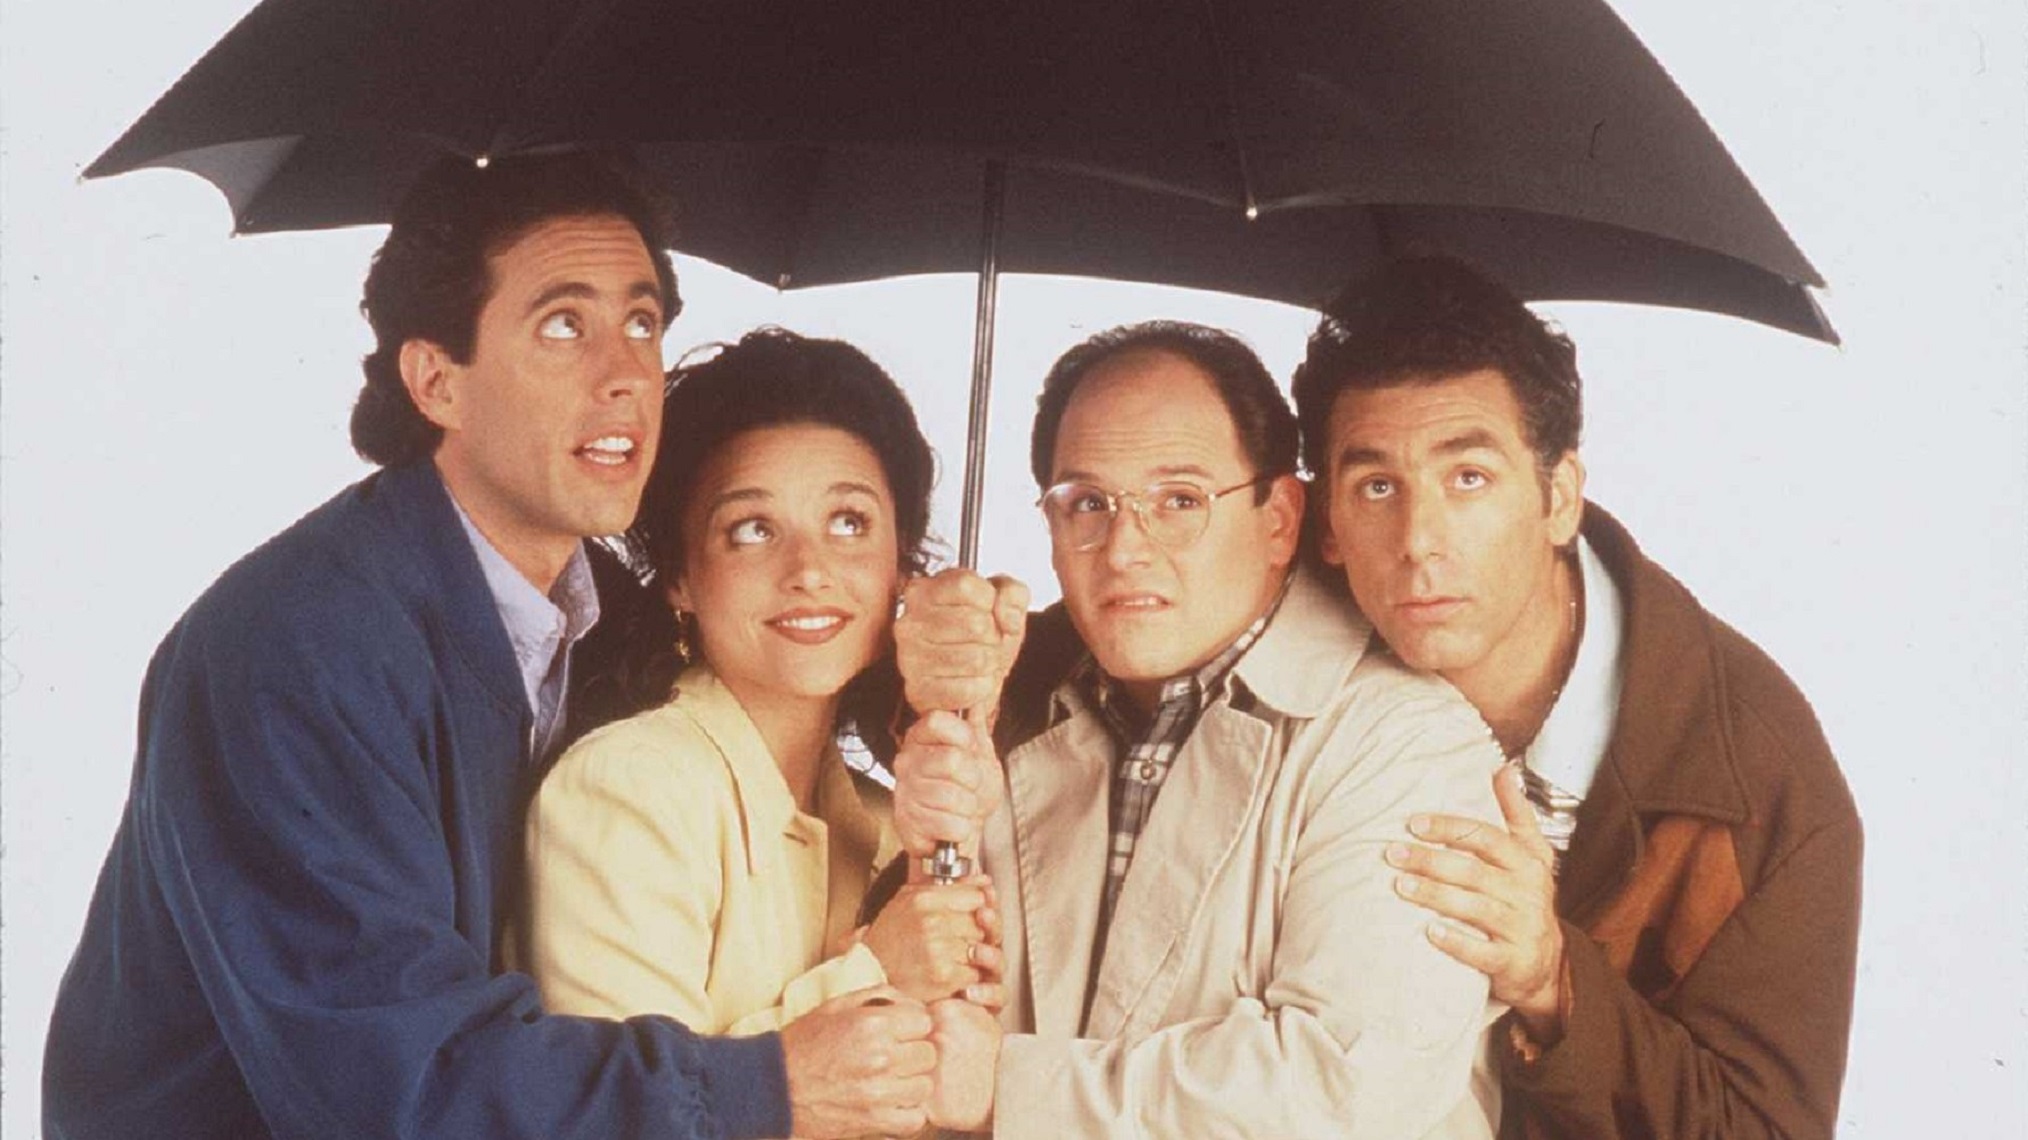 The 'Seinfeld' Experience Is Coming to New York City in Fall 2019...